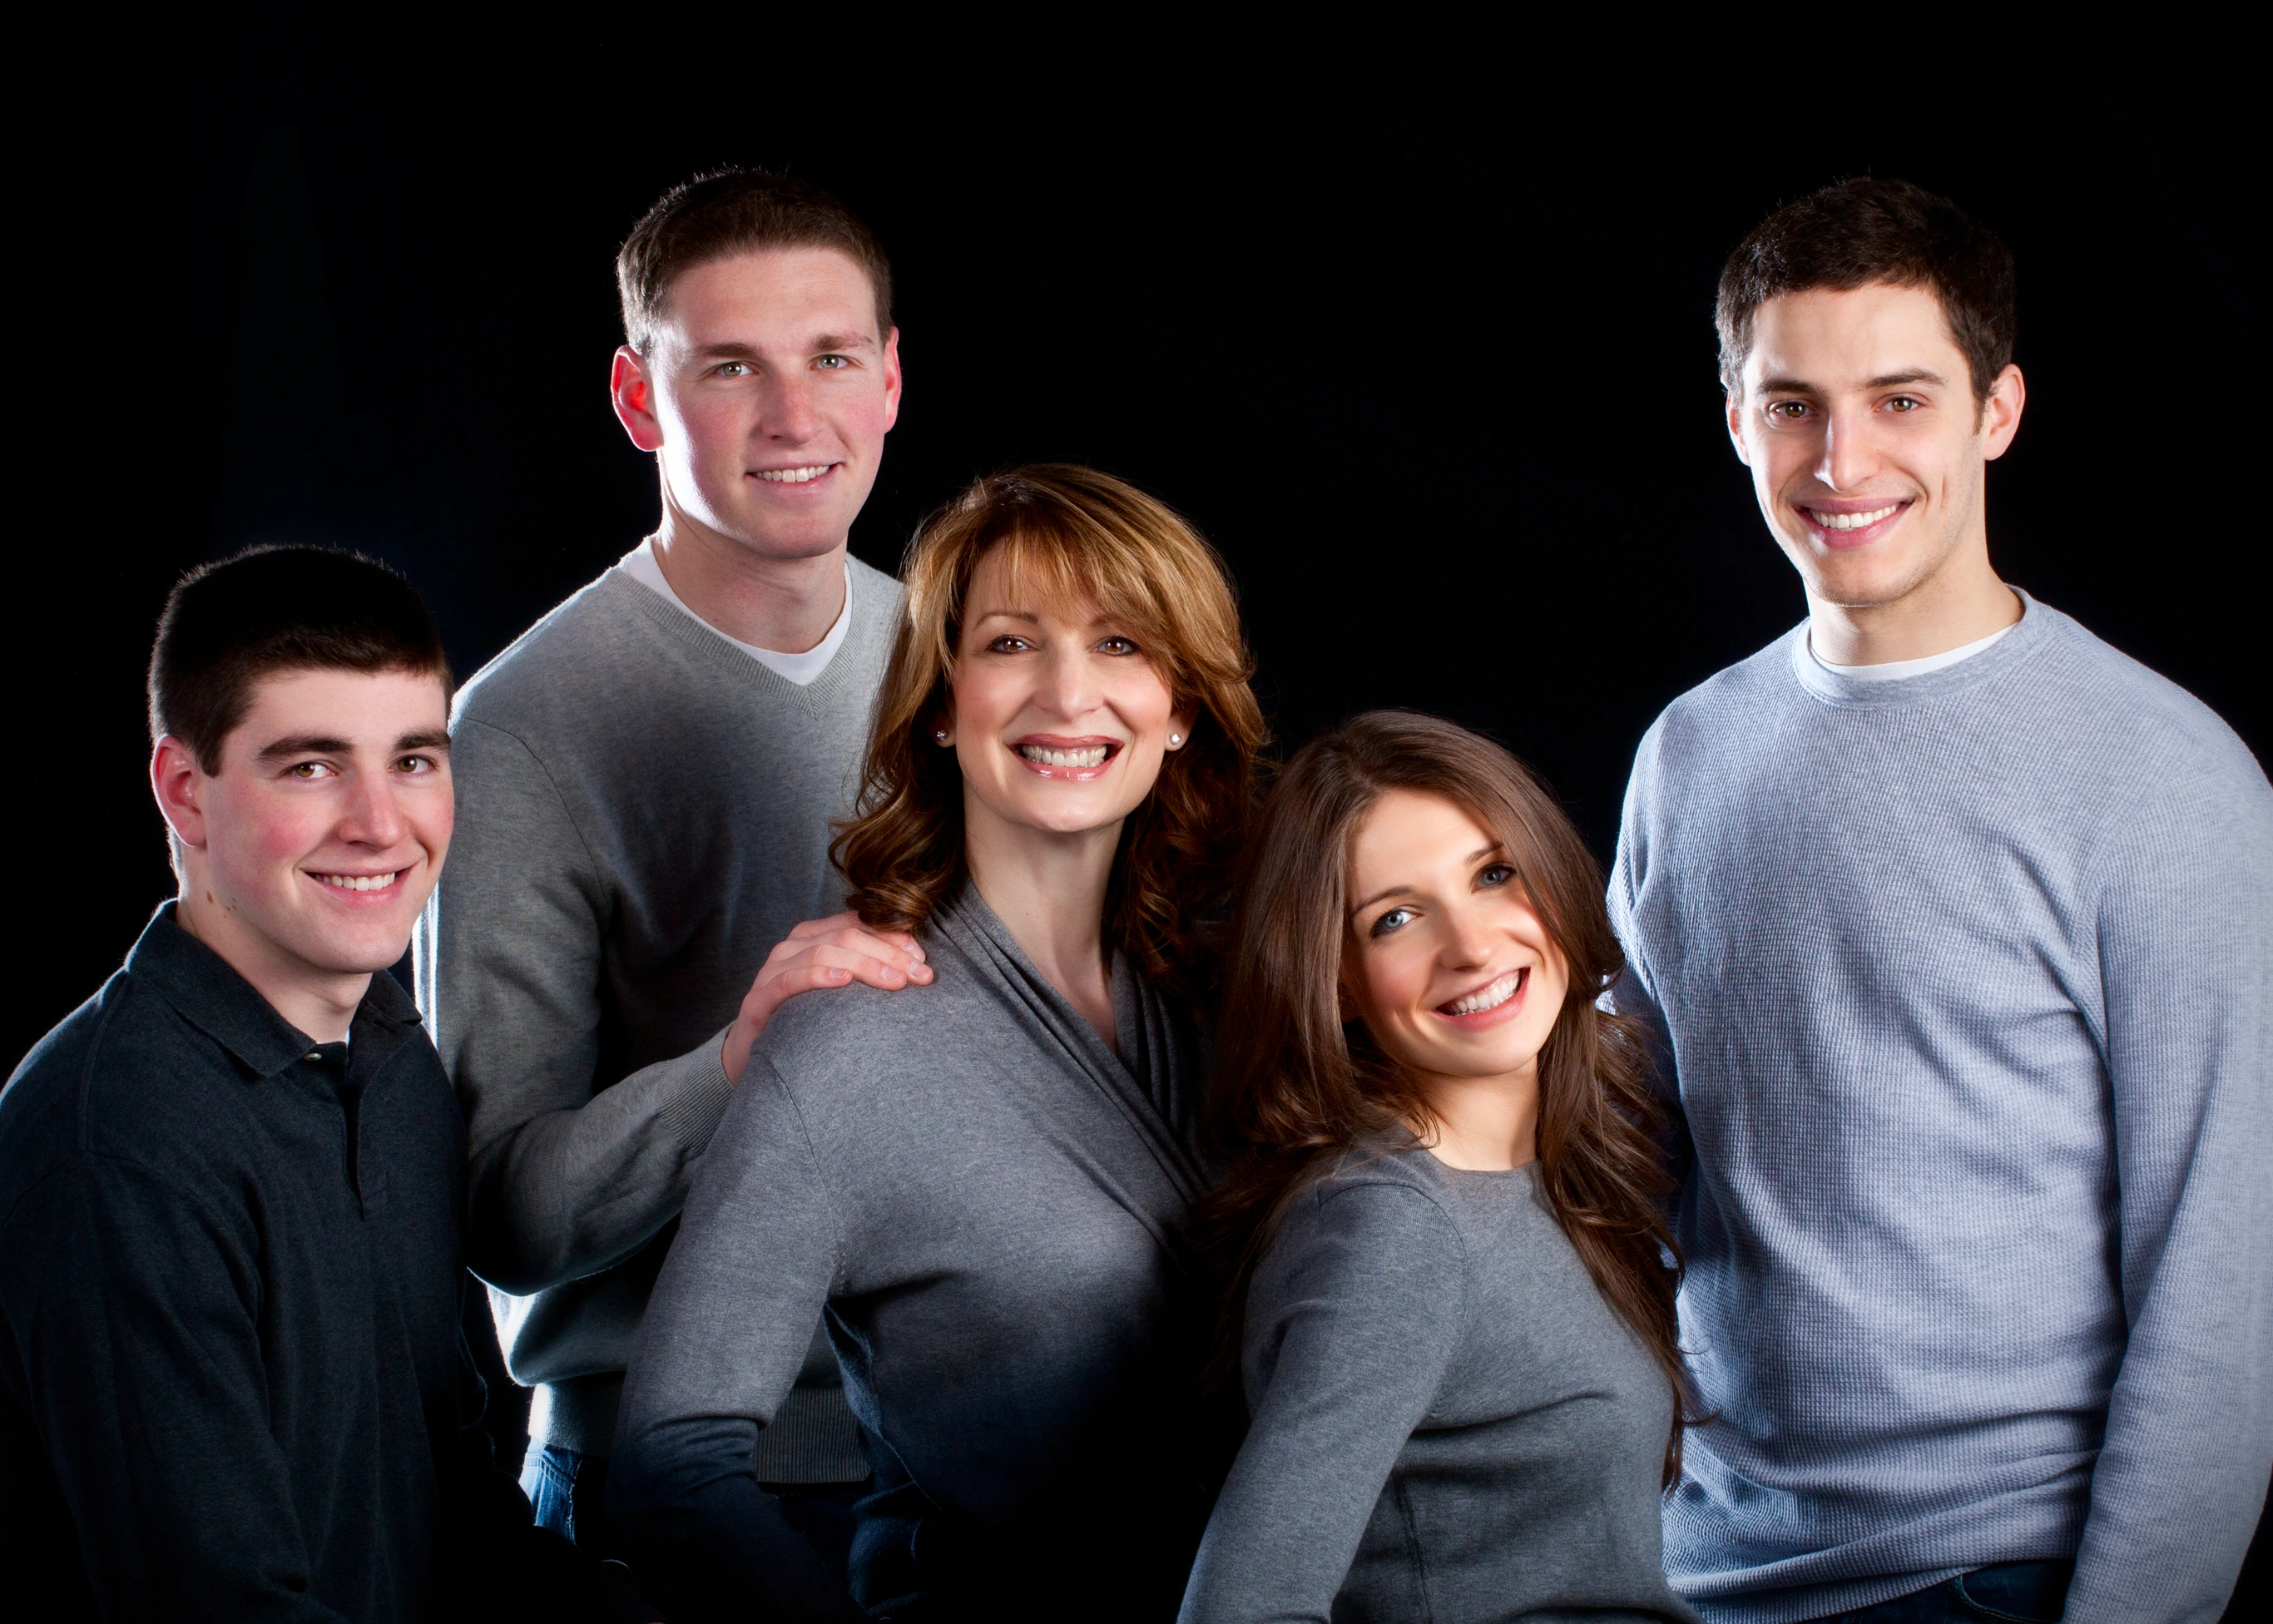 family portraits in maine professional photography studio